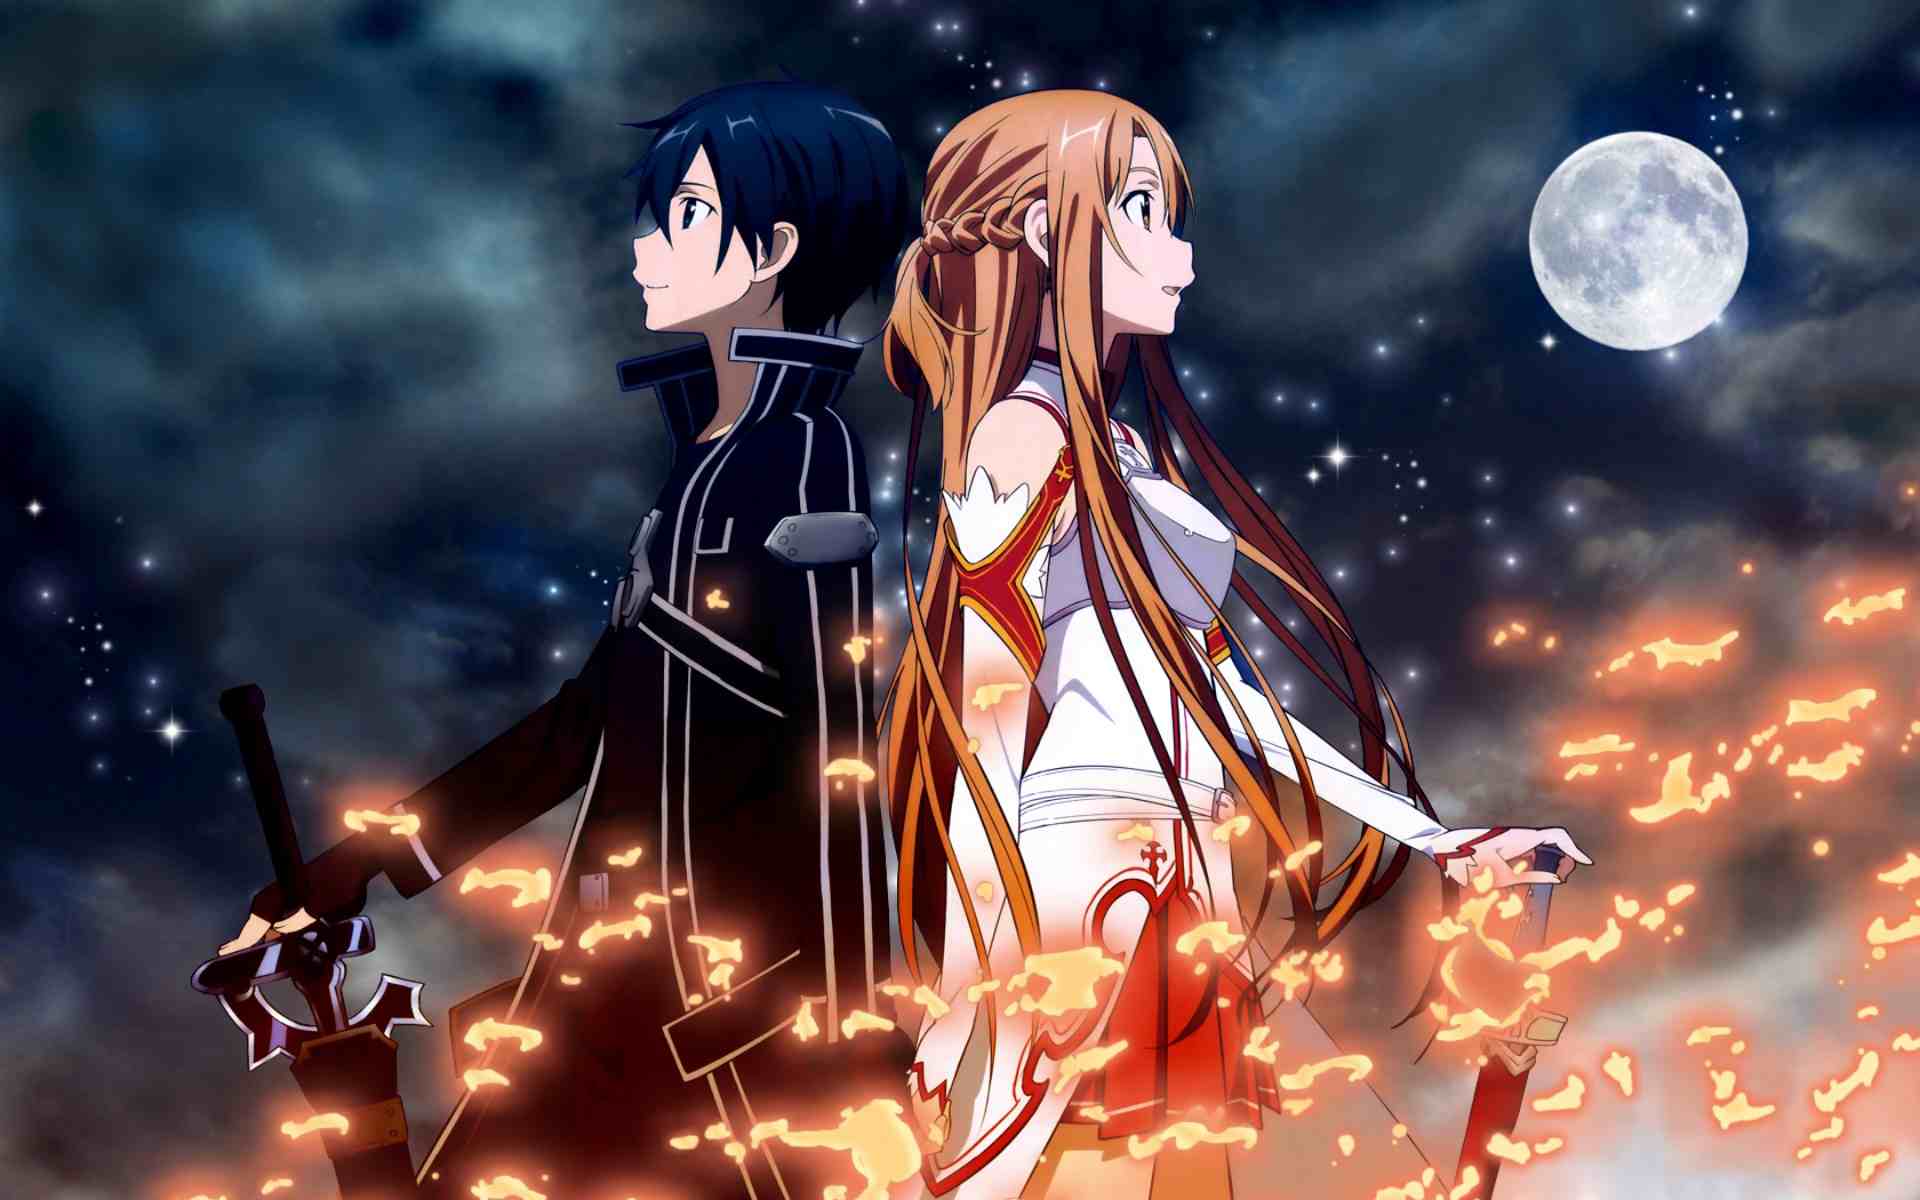 Live Action Sword Art Online Producer Wants To Avoid